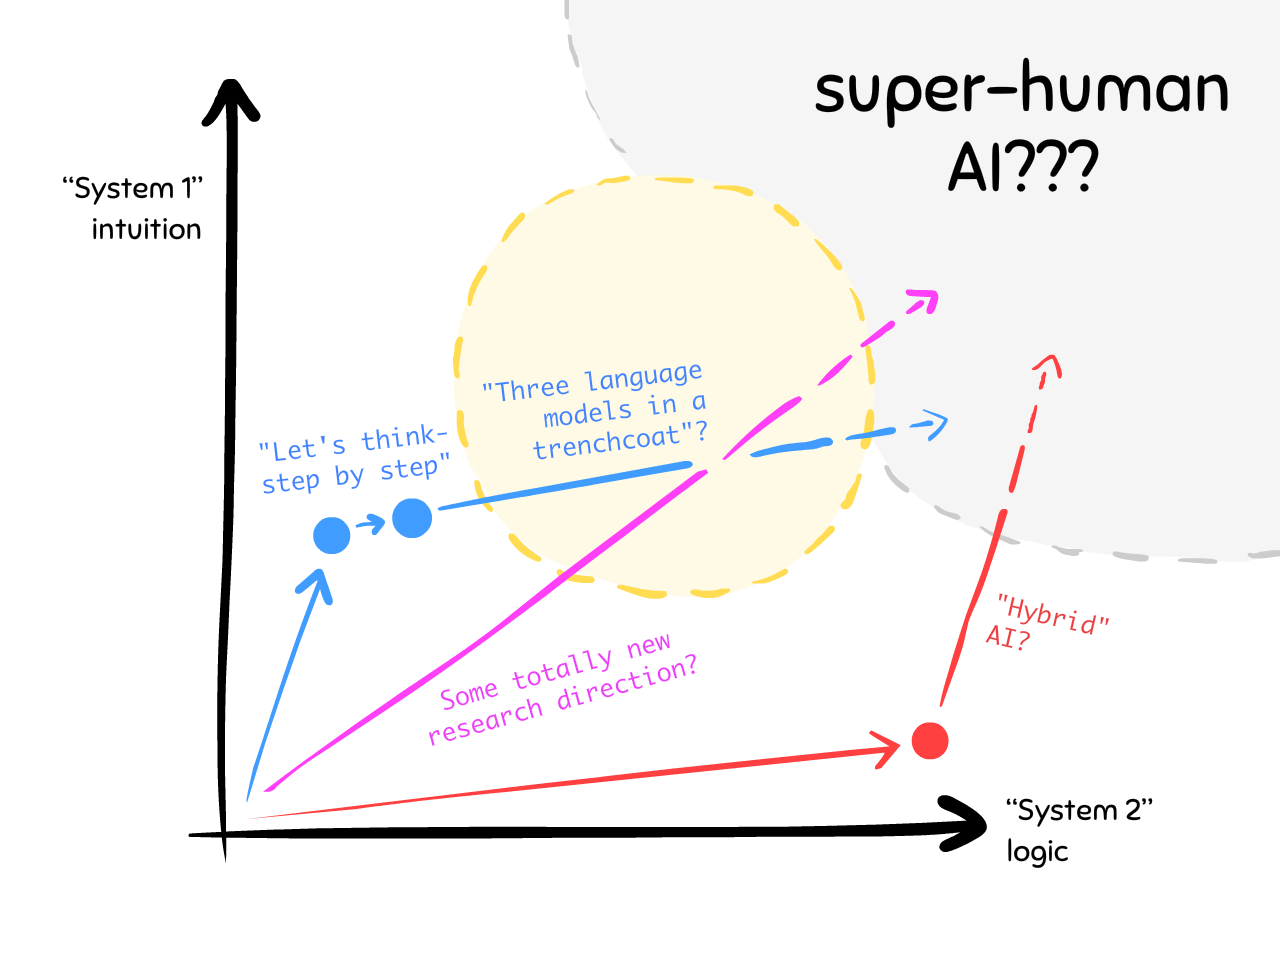 Same graph as before, but speculative new trajectories, so that AI hits the "human range"... and beyond?